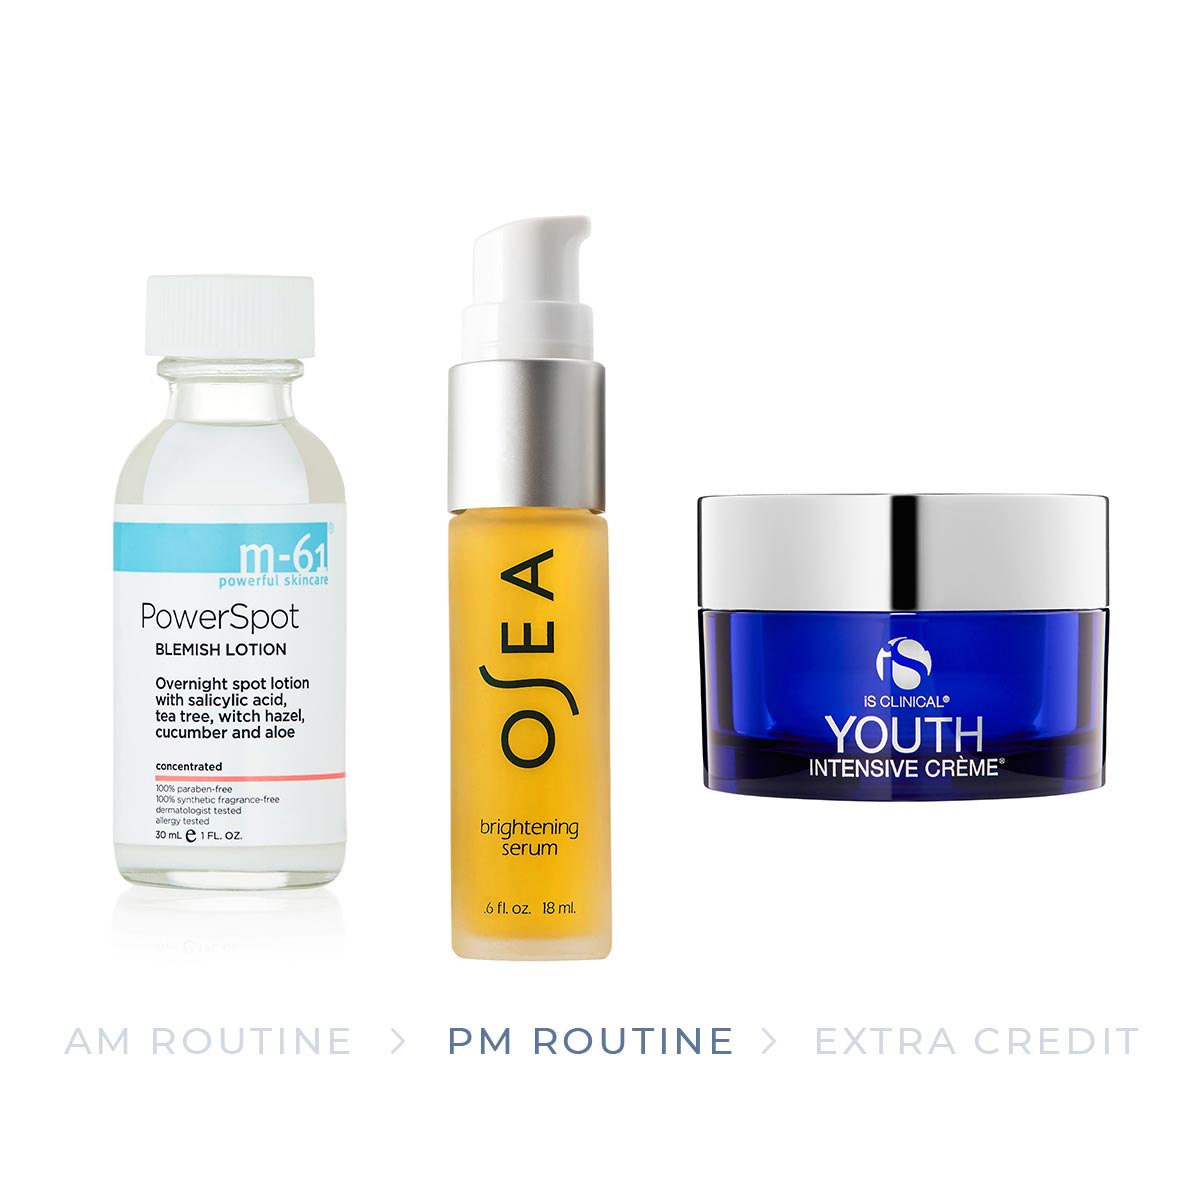 The products for the PM part of the oily skin skincare routine